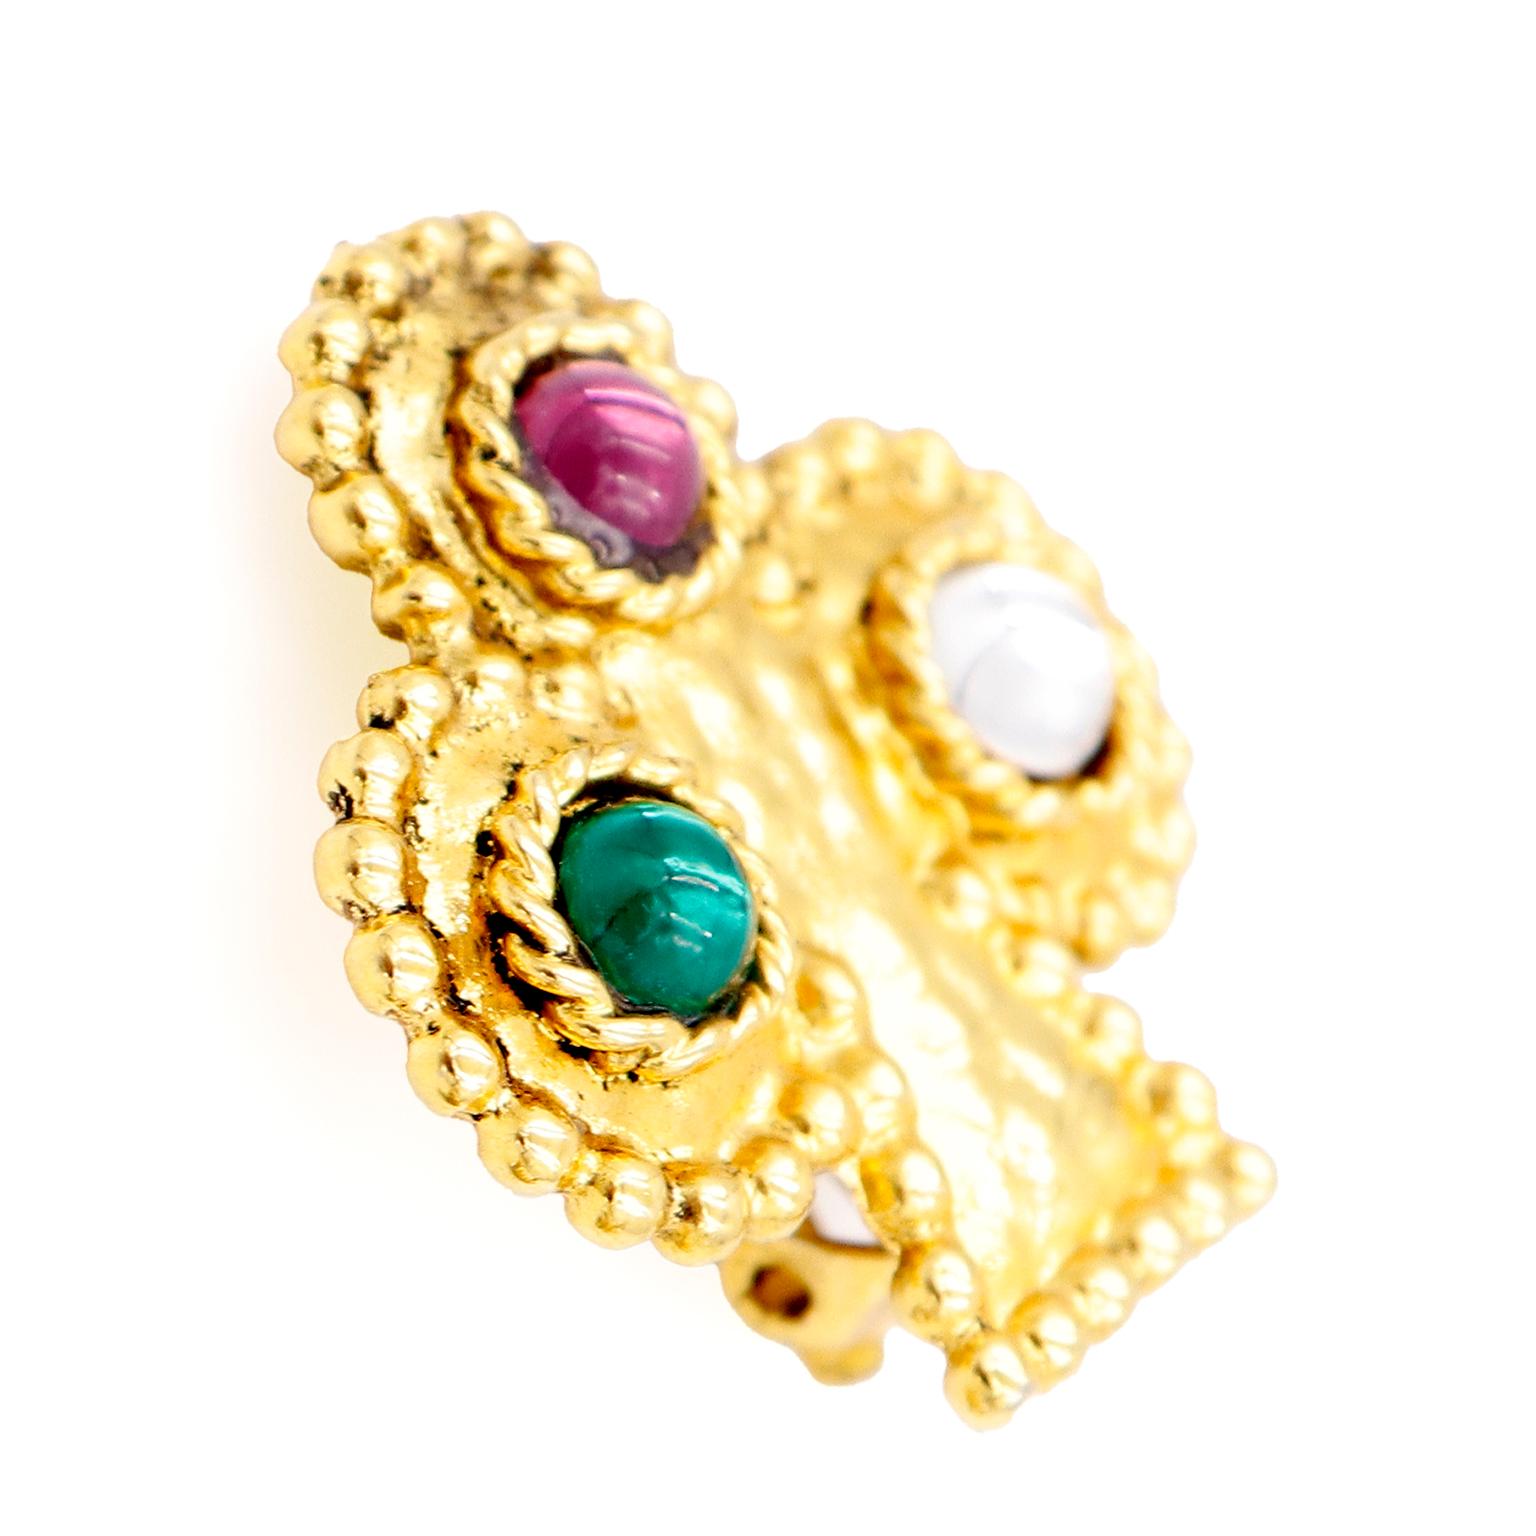 Women's Edouard Rambaud Vintage Hammered Gold Clubs Earrings w Colorful Stones